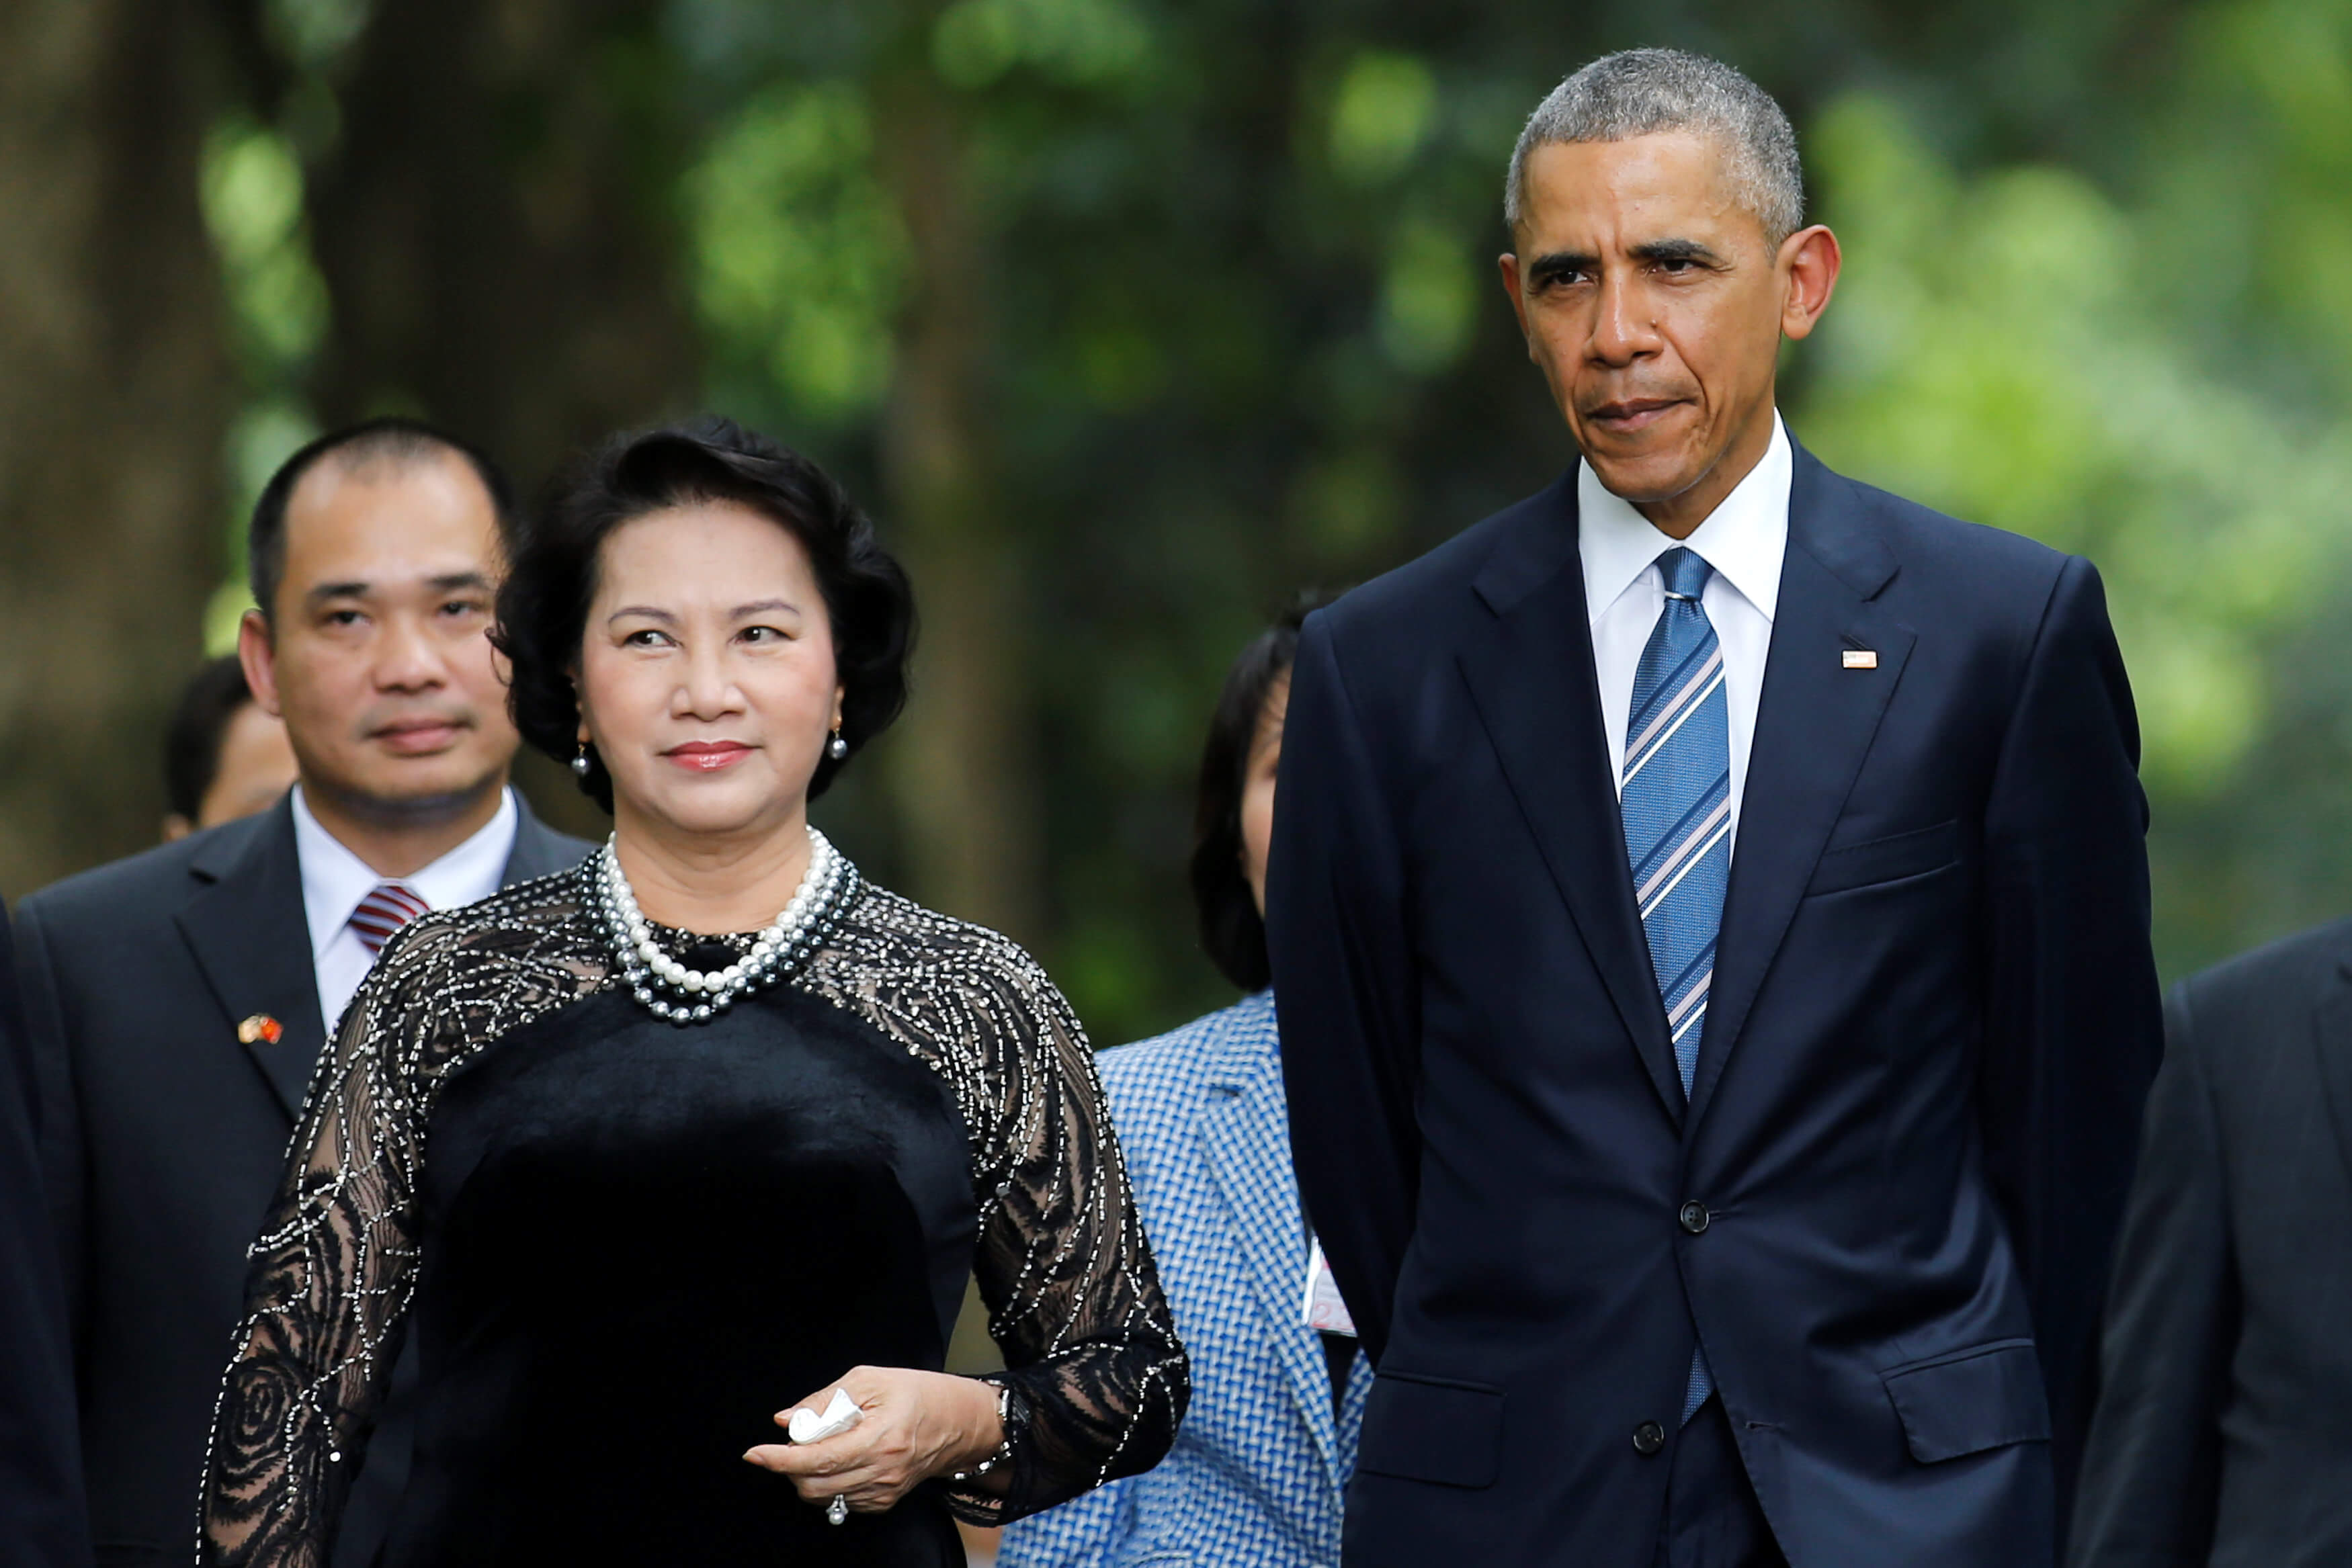 U.S. President Barack Obama walks with Vietnam's National Assembly Chairwoman Nguyen Thi Kim Ngan during a visit at the gardens of the presidential palace in Hanoi, Vietnam May 23, 2016. REUTERS/Carlos Barria